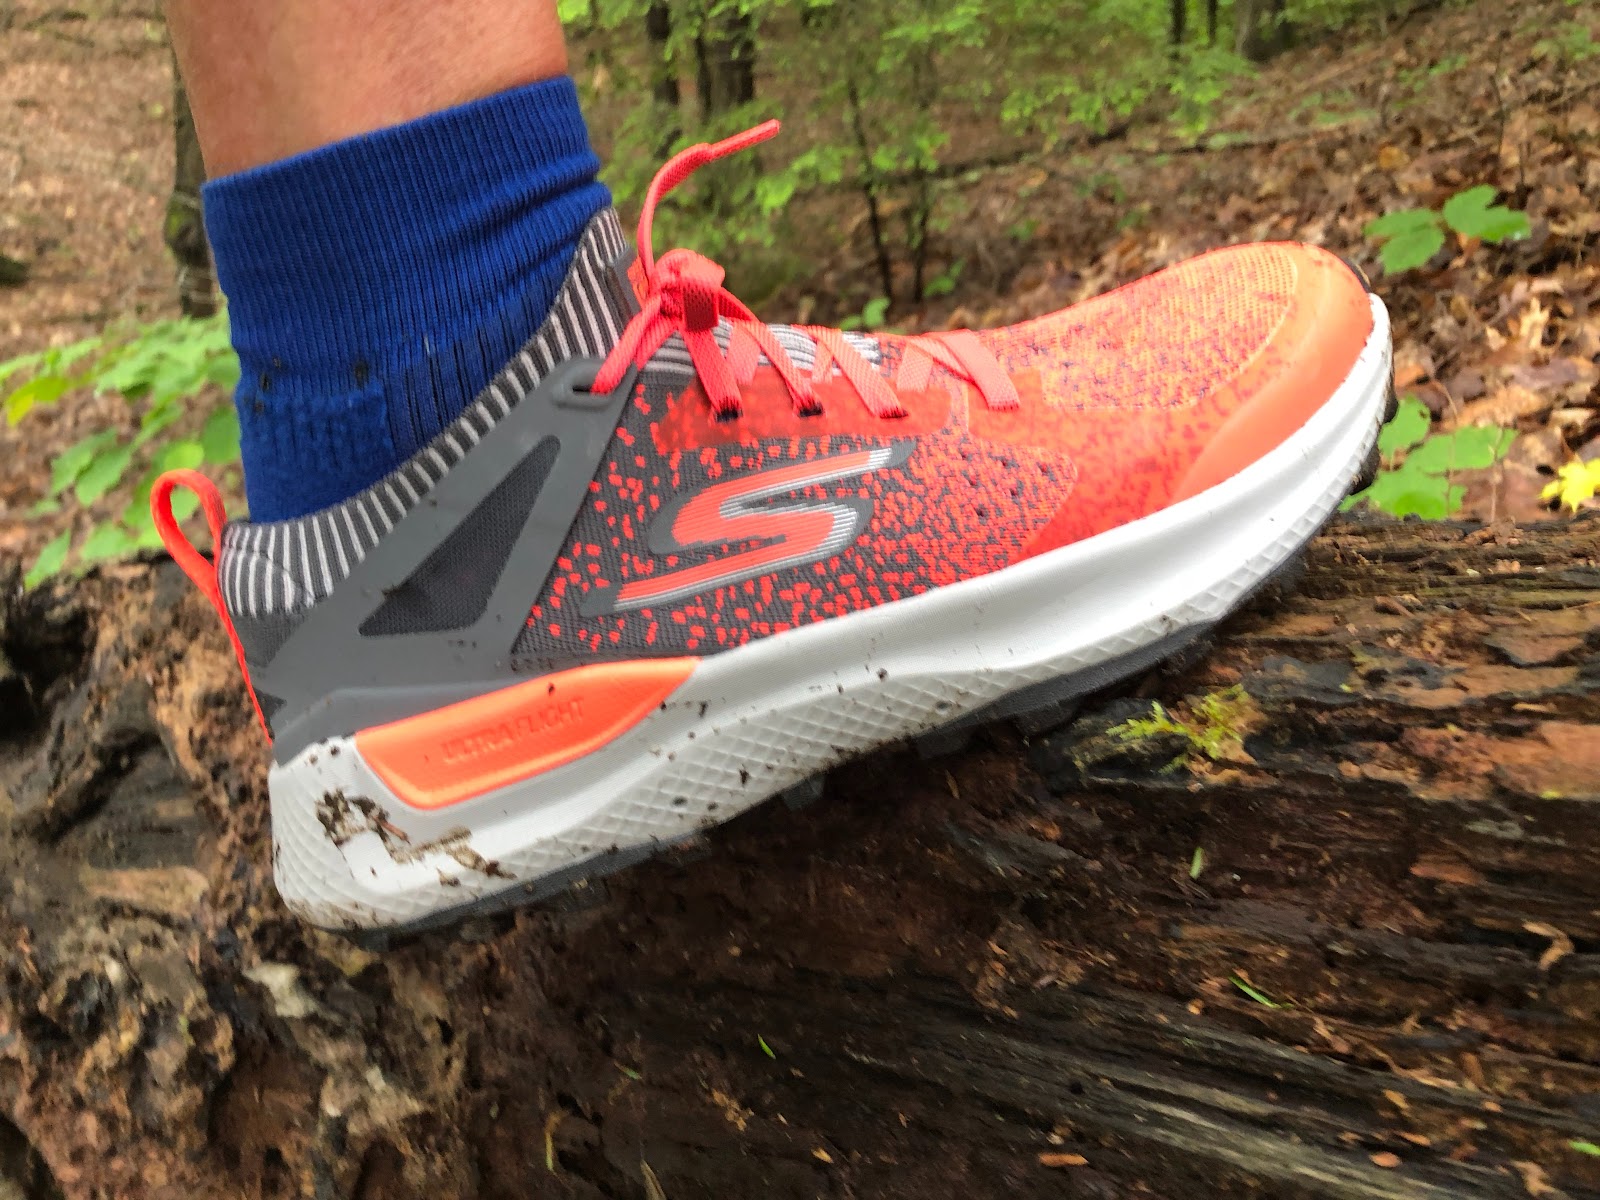 Road Trail Run: Skechers Performance GO Run Max Trail 5 Ultra Review:  Radically Different & Awesome Riding...On the Right Kind of Trails!